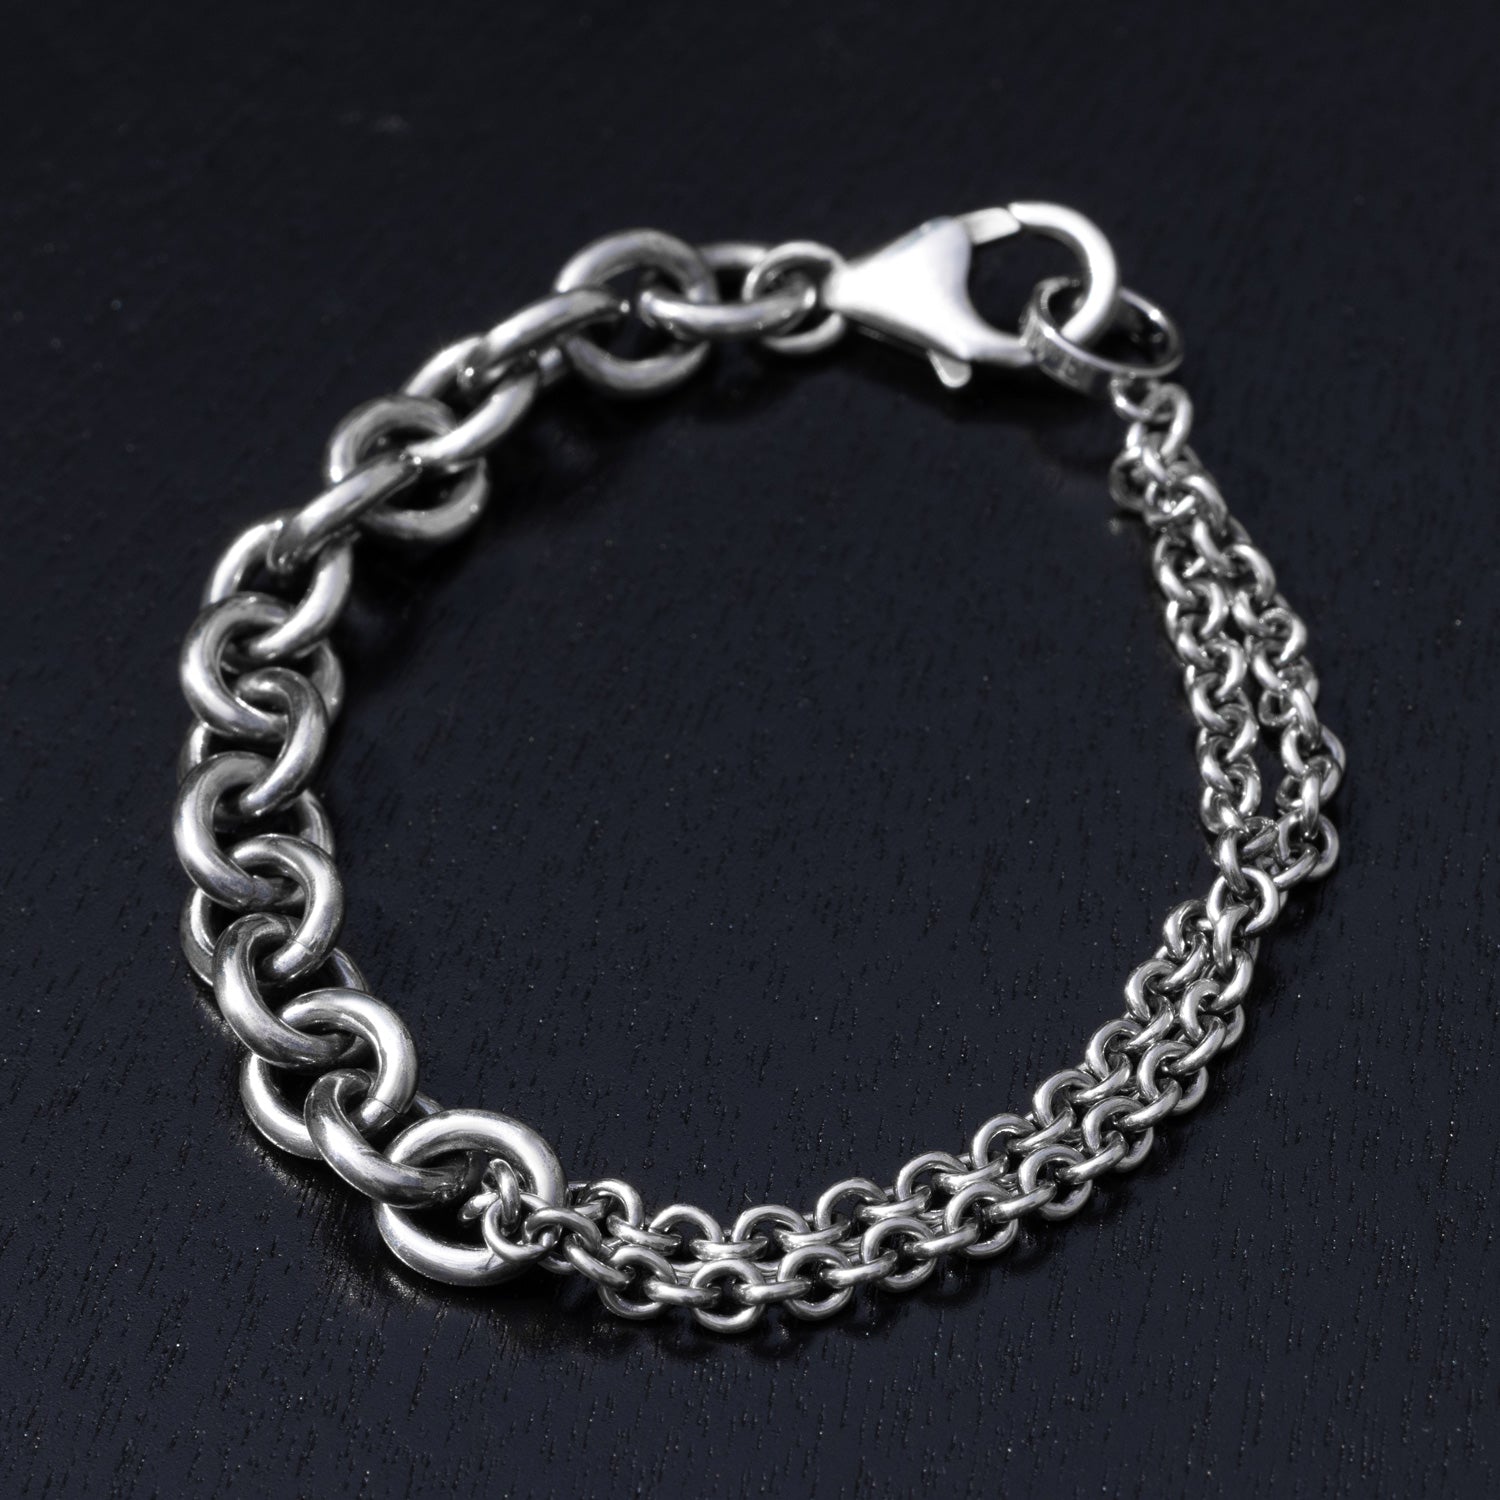 CARRINGTON BLACK STERLING SILVER CABLE CHAIN NECKLACE